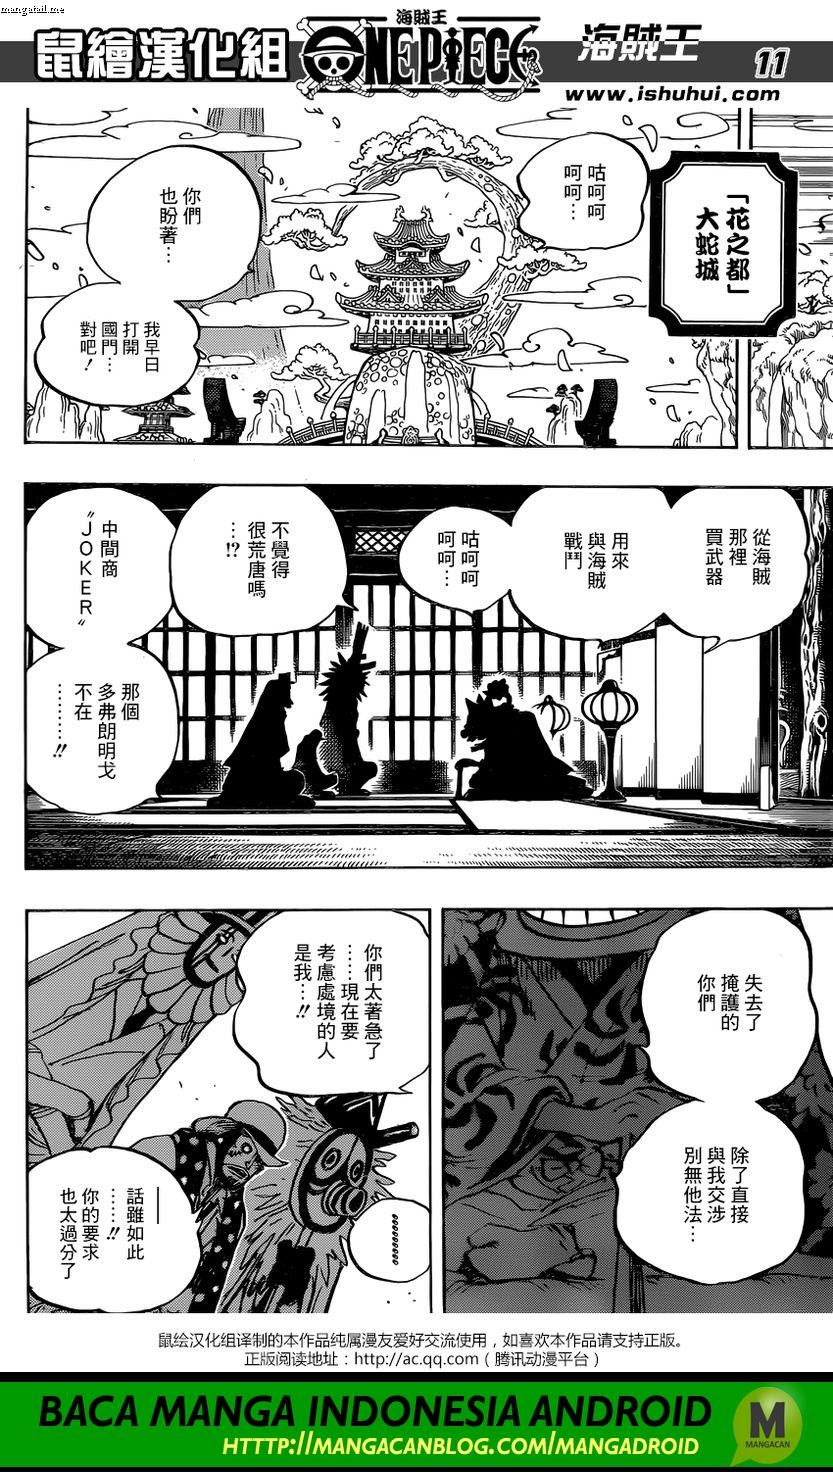 One Piece Chapter 928 – Raw - 111